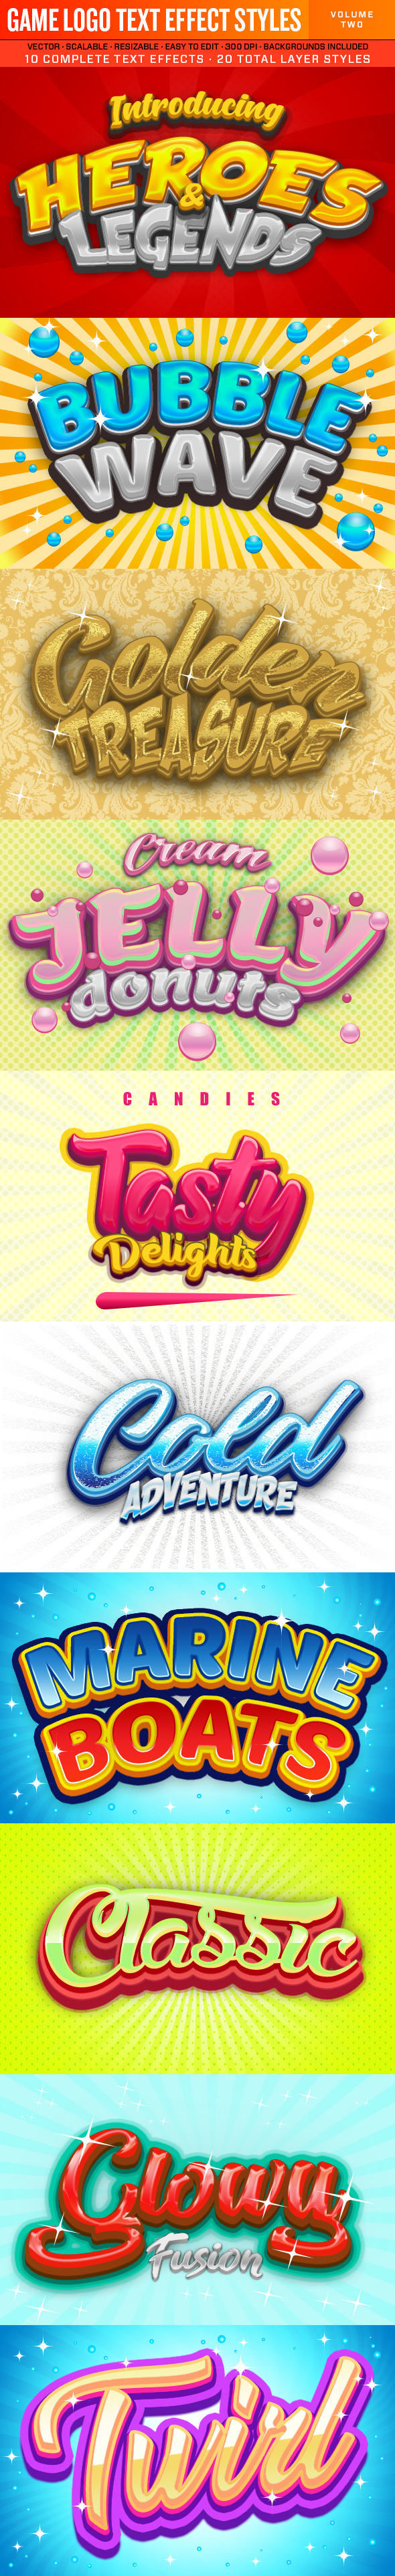 Game Logo Text Effect Styles 2